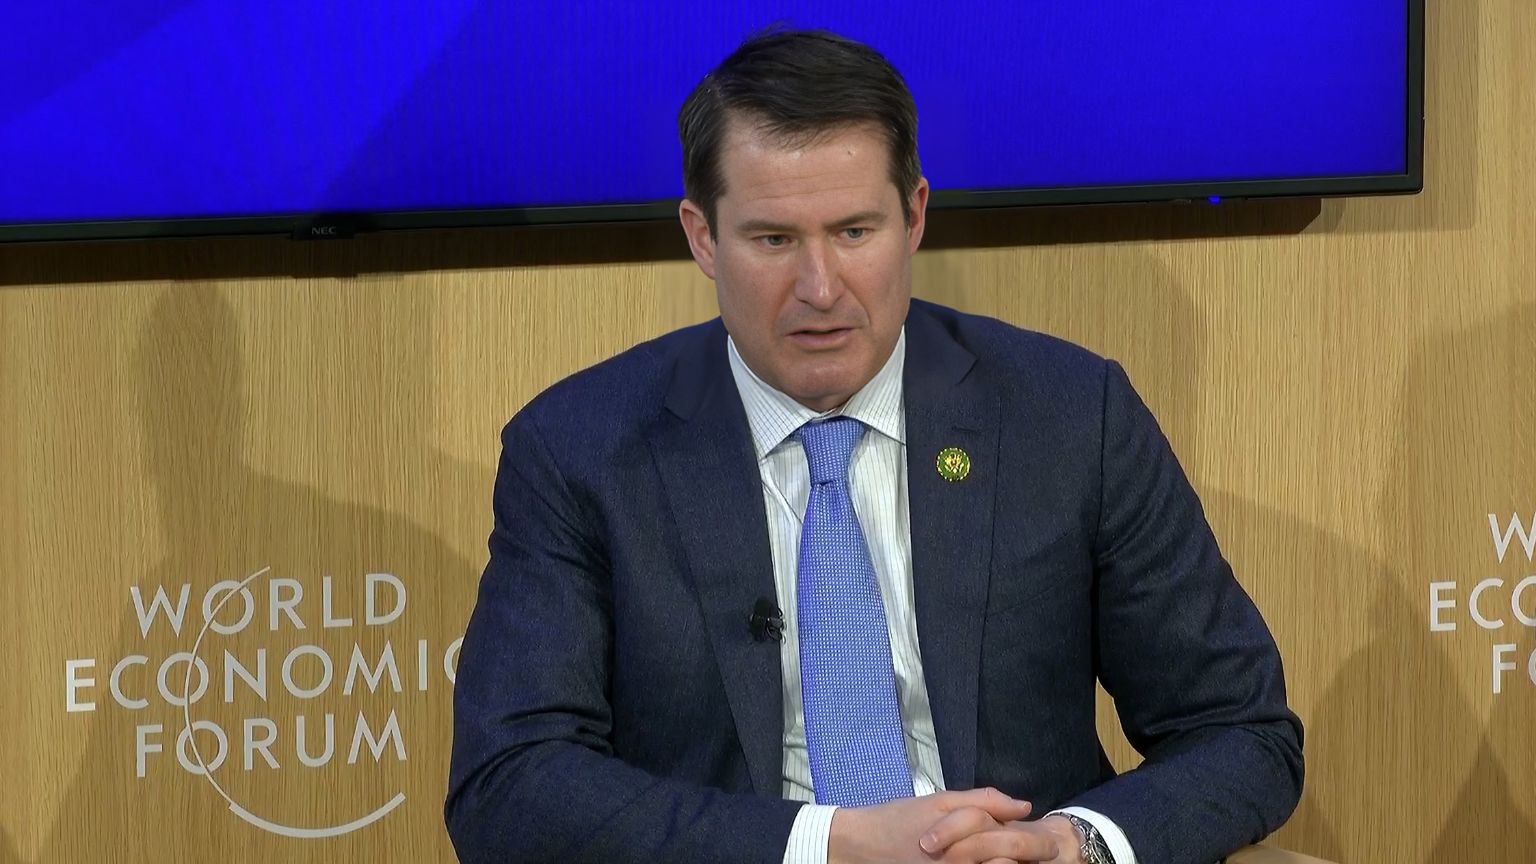 Rep. Seth Moulton says you can’t yell fire in a crowded theater (not true), blasts online “misinformation” at Davos